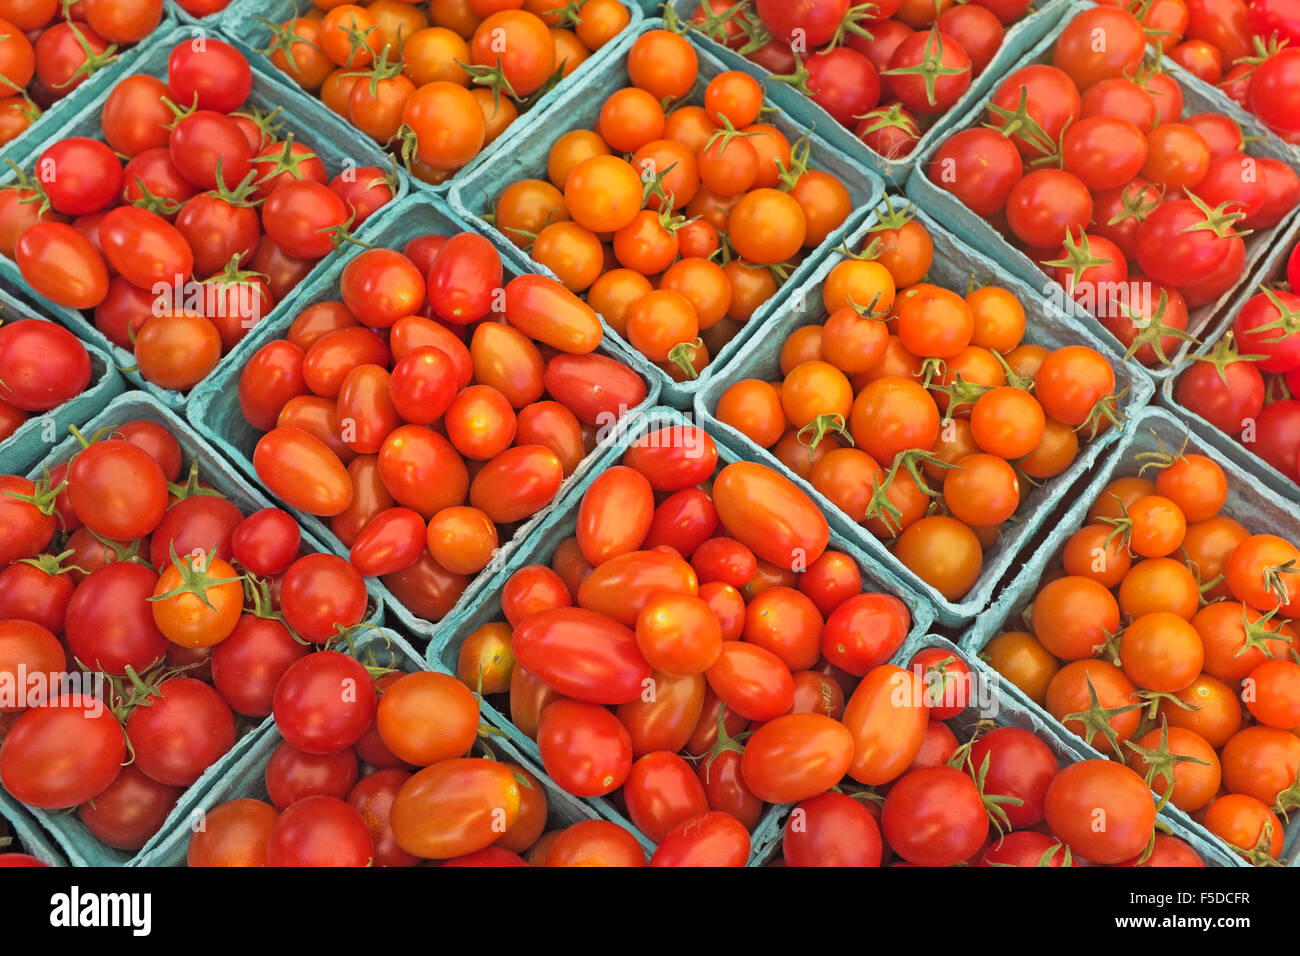 Freshly picked cartons of cherry tomatoes on display at a summer farmer's market in Bend, Oregon Stock Photo